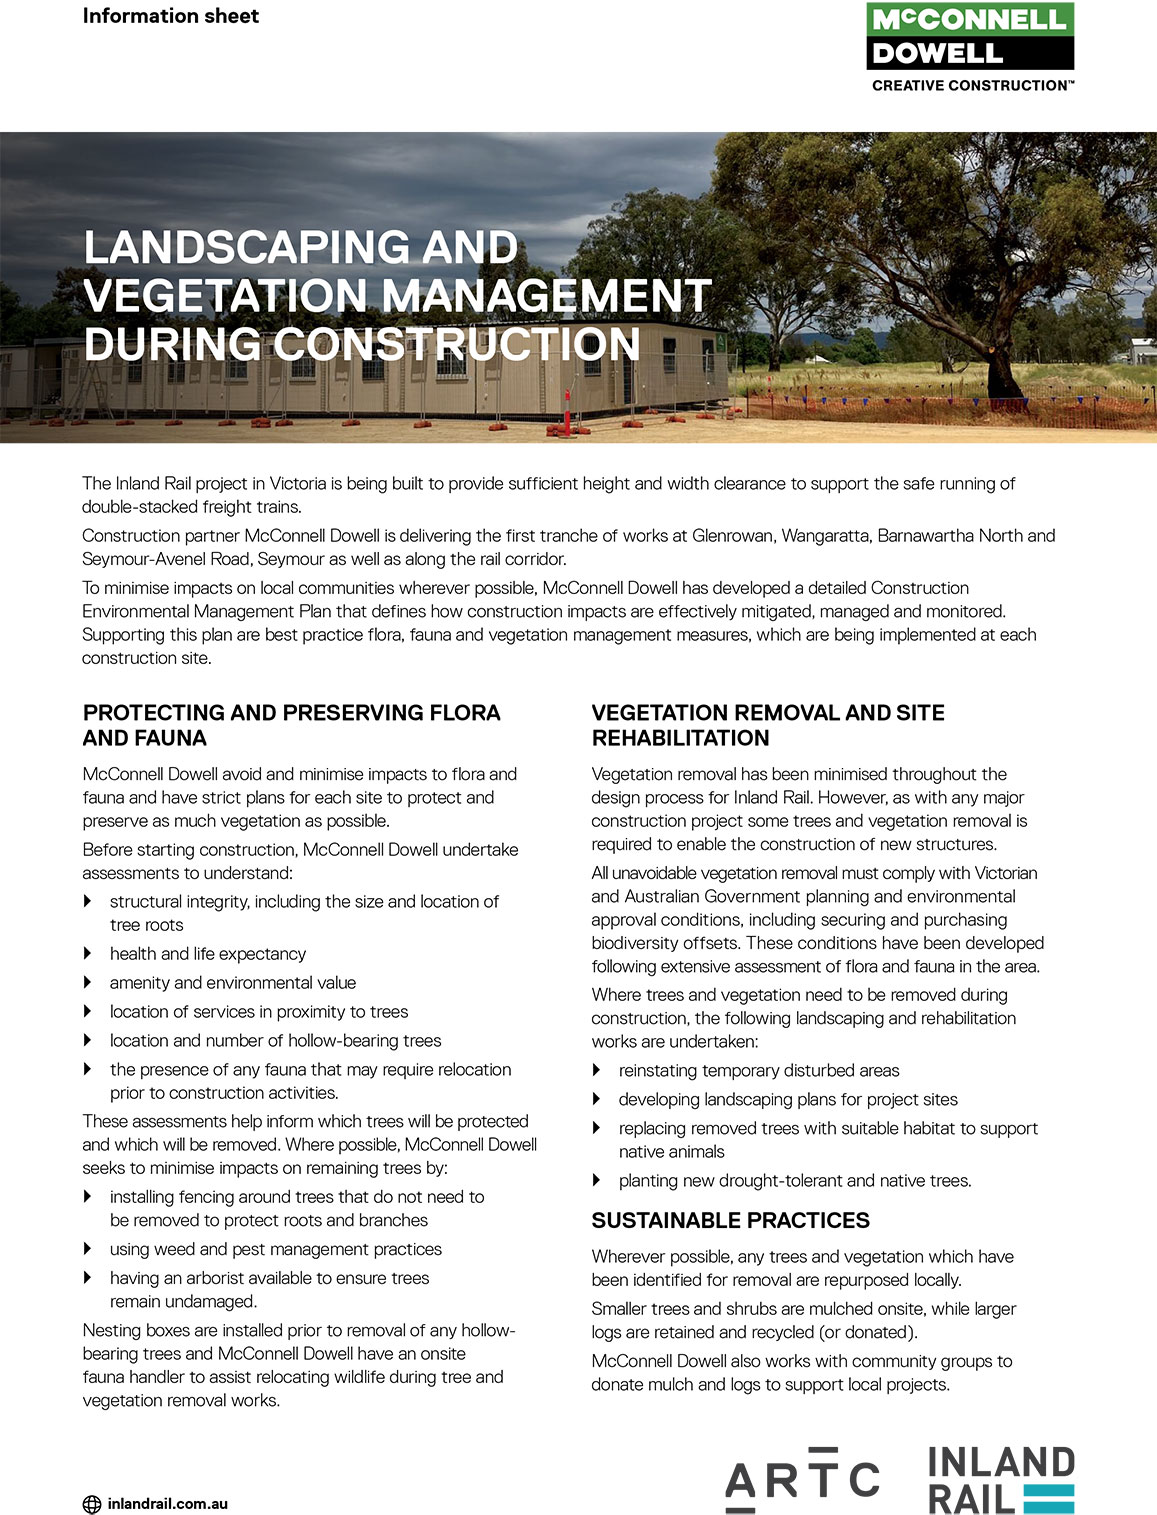 Thumbnail image of Landscaping and vegetation management in construction